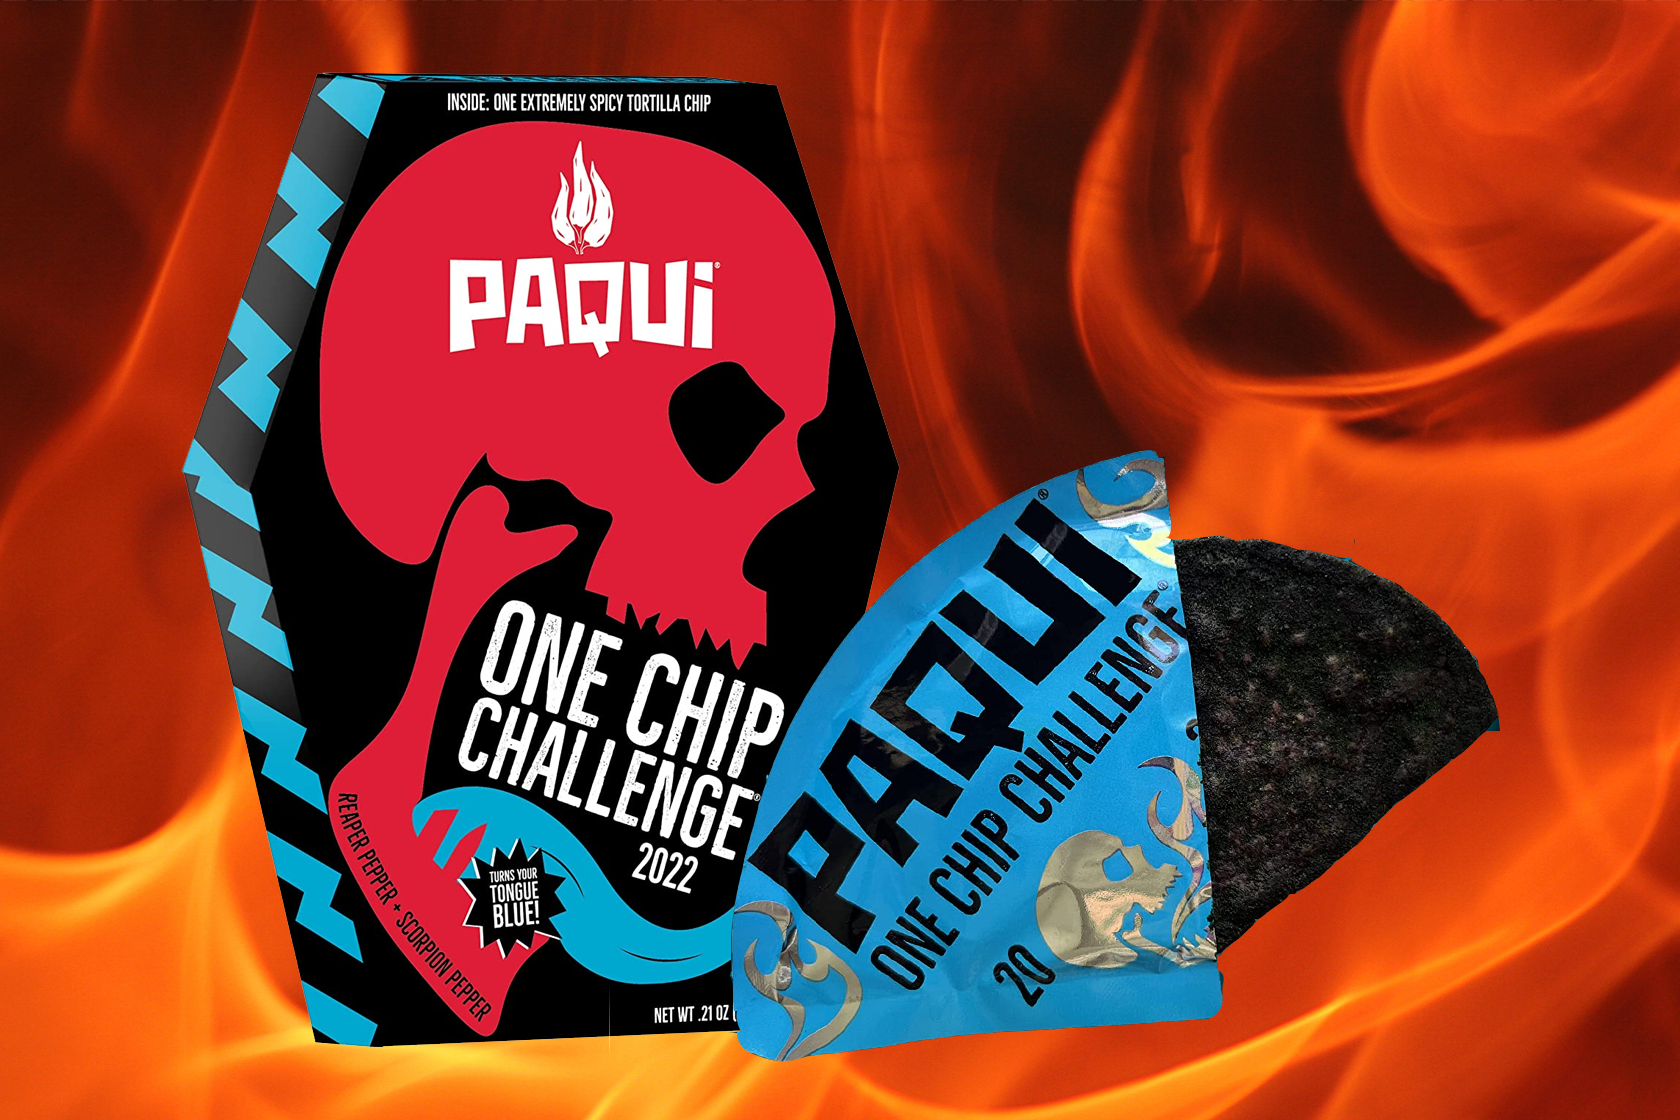 Paqui” hot chips banned from Southern Colorado school district